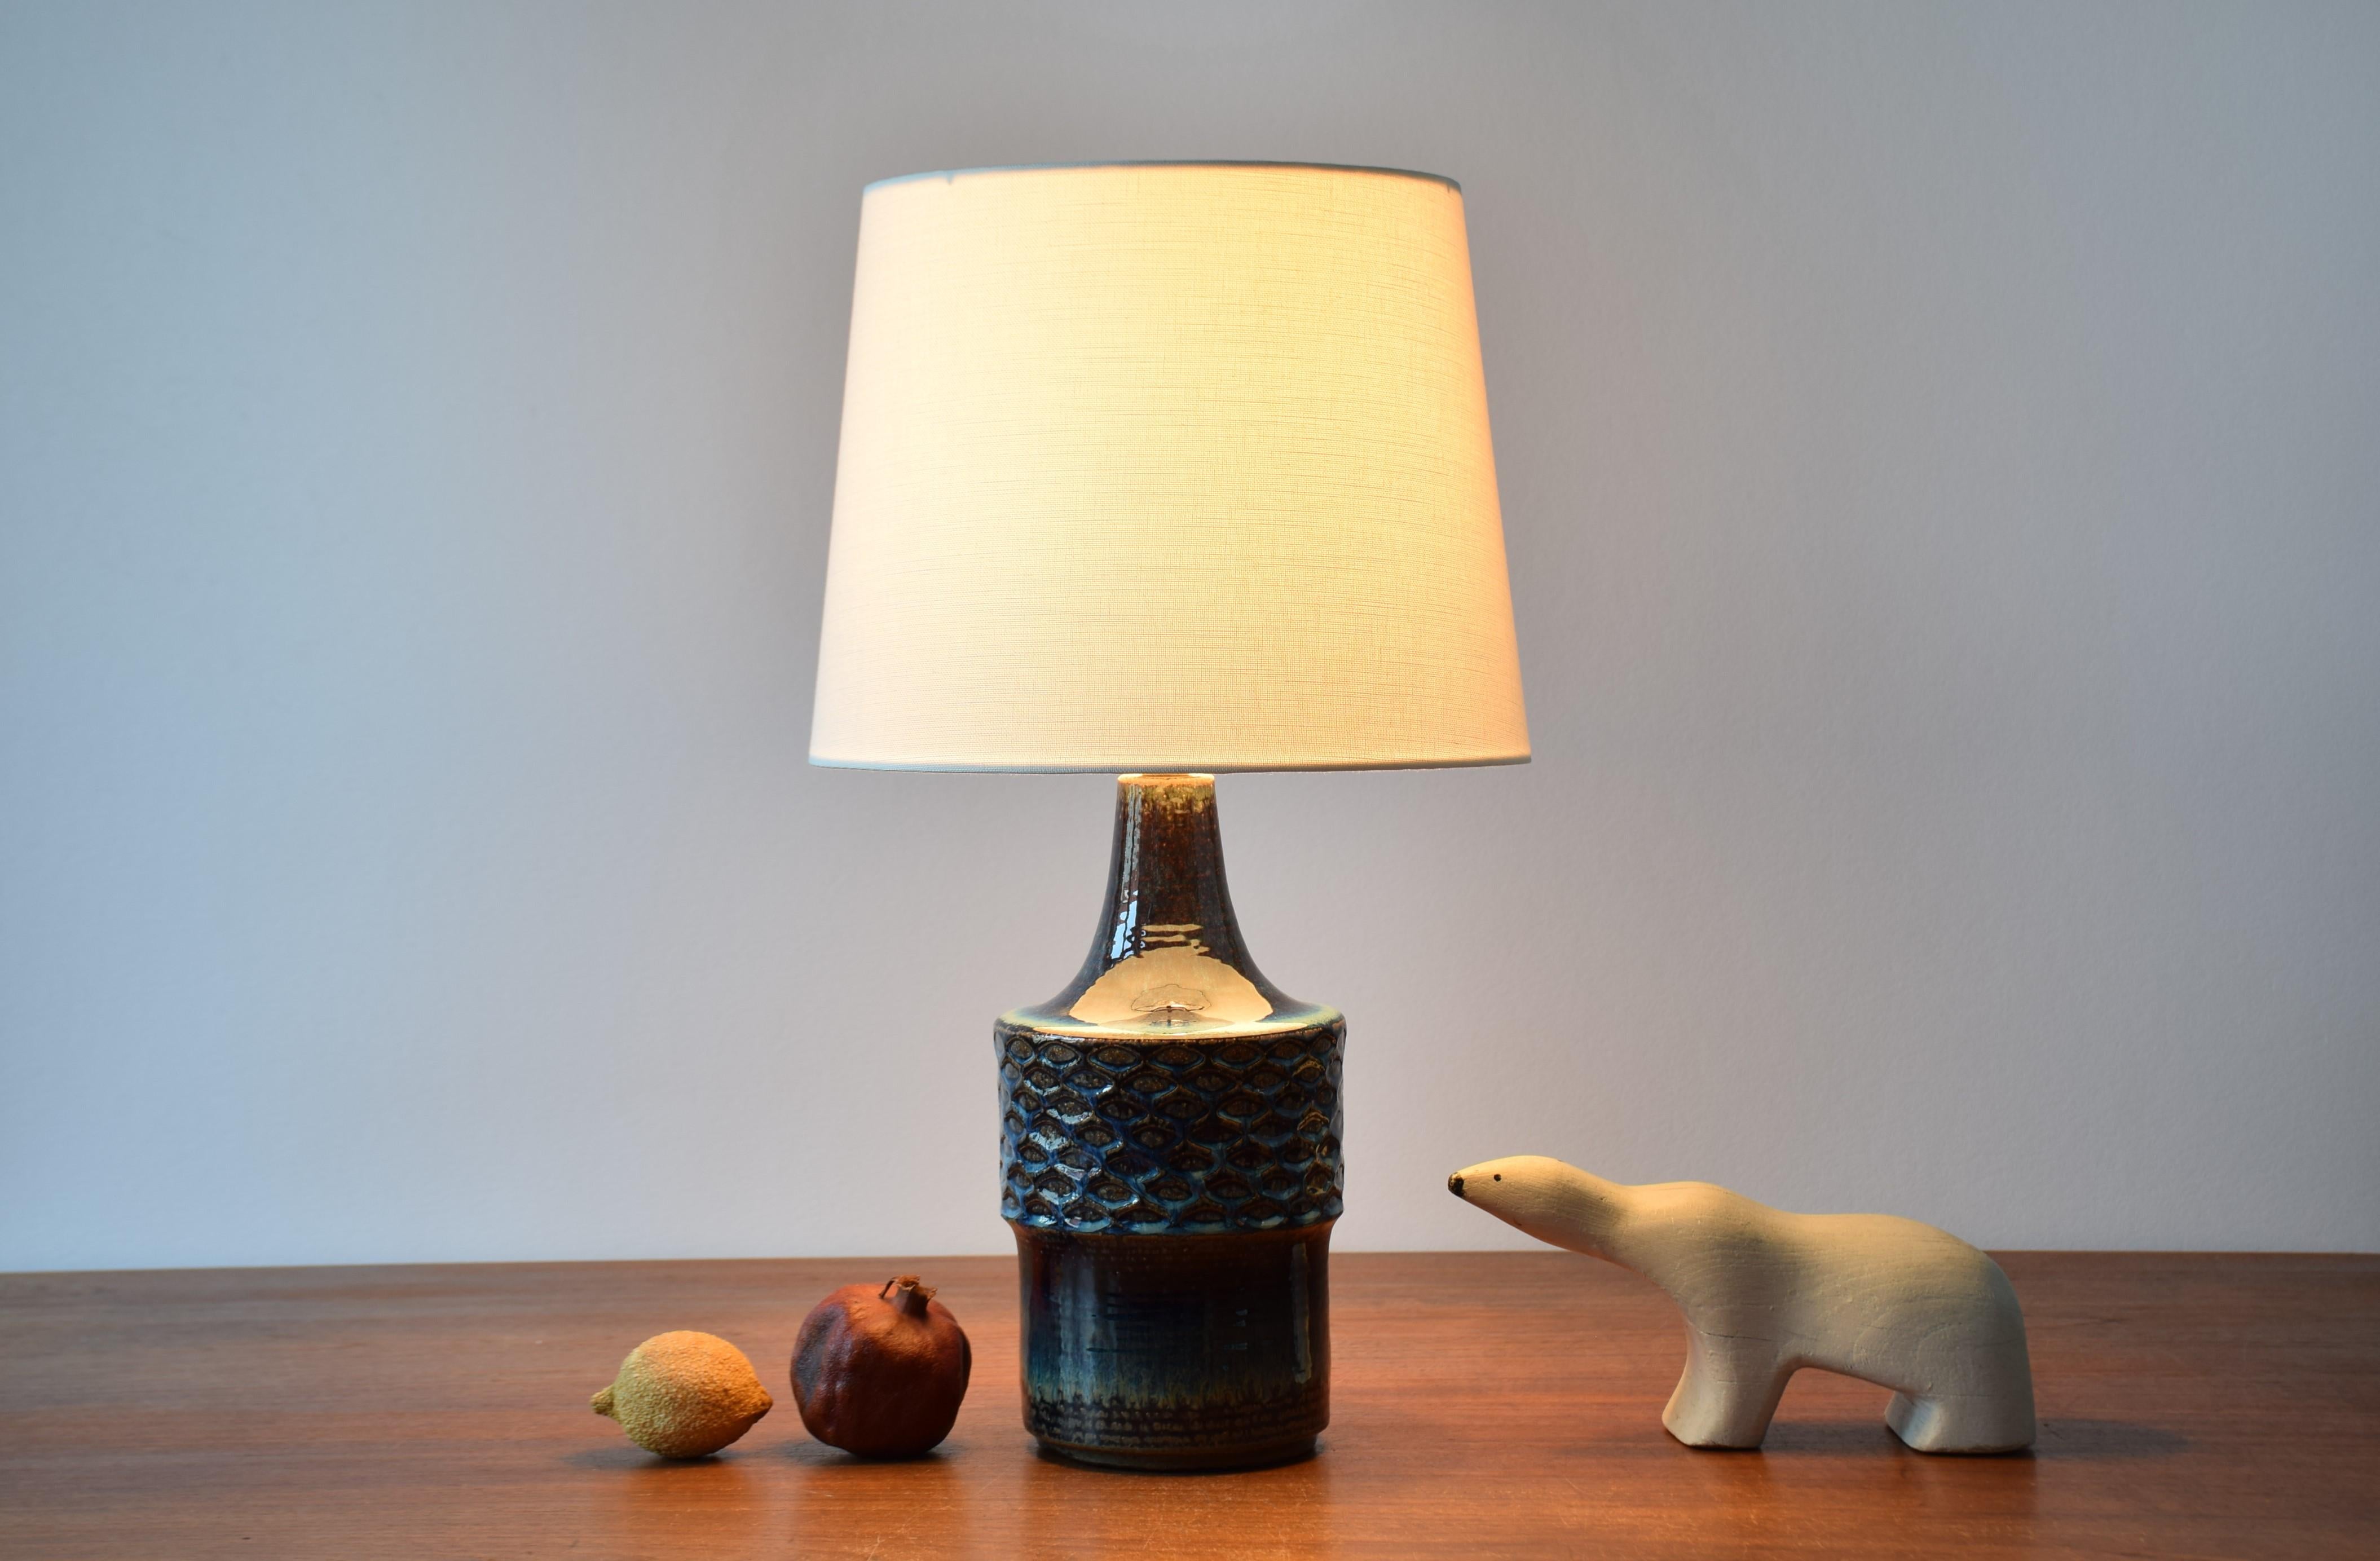 Rare Mid-century Danish table lamp from the acknowledged stoneware manufacturer Søholm. Made circa 1960s.

The lamp has a shiny glaze in deep blue, brown and beige colors. The body of the lamp shows a repeated pattern which seems to be inspired by